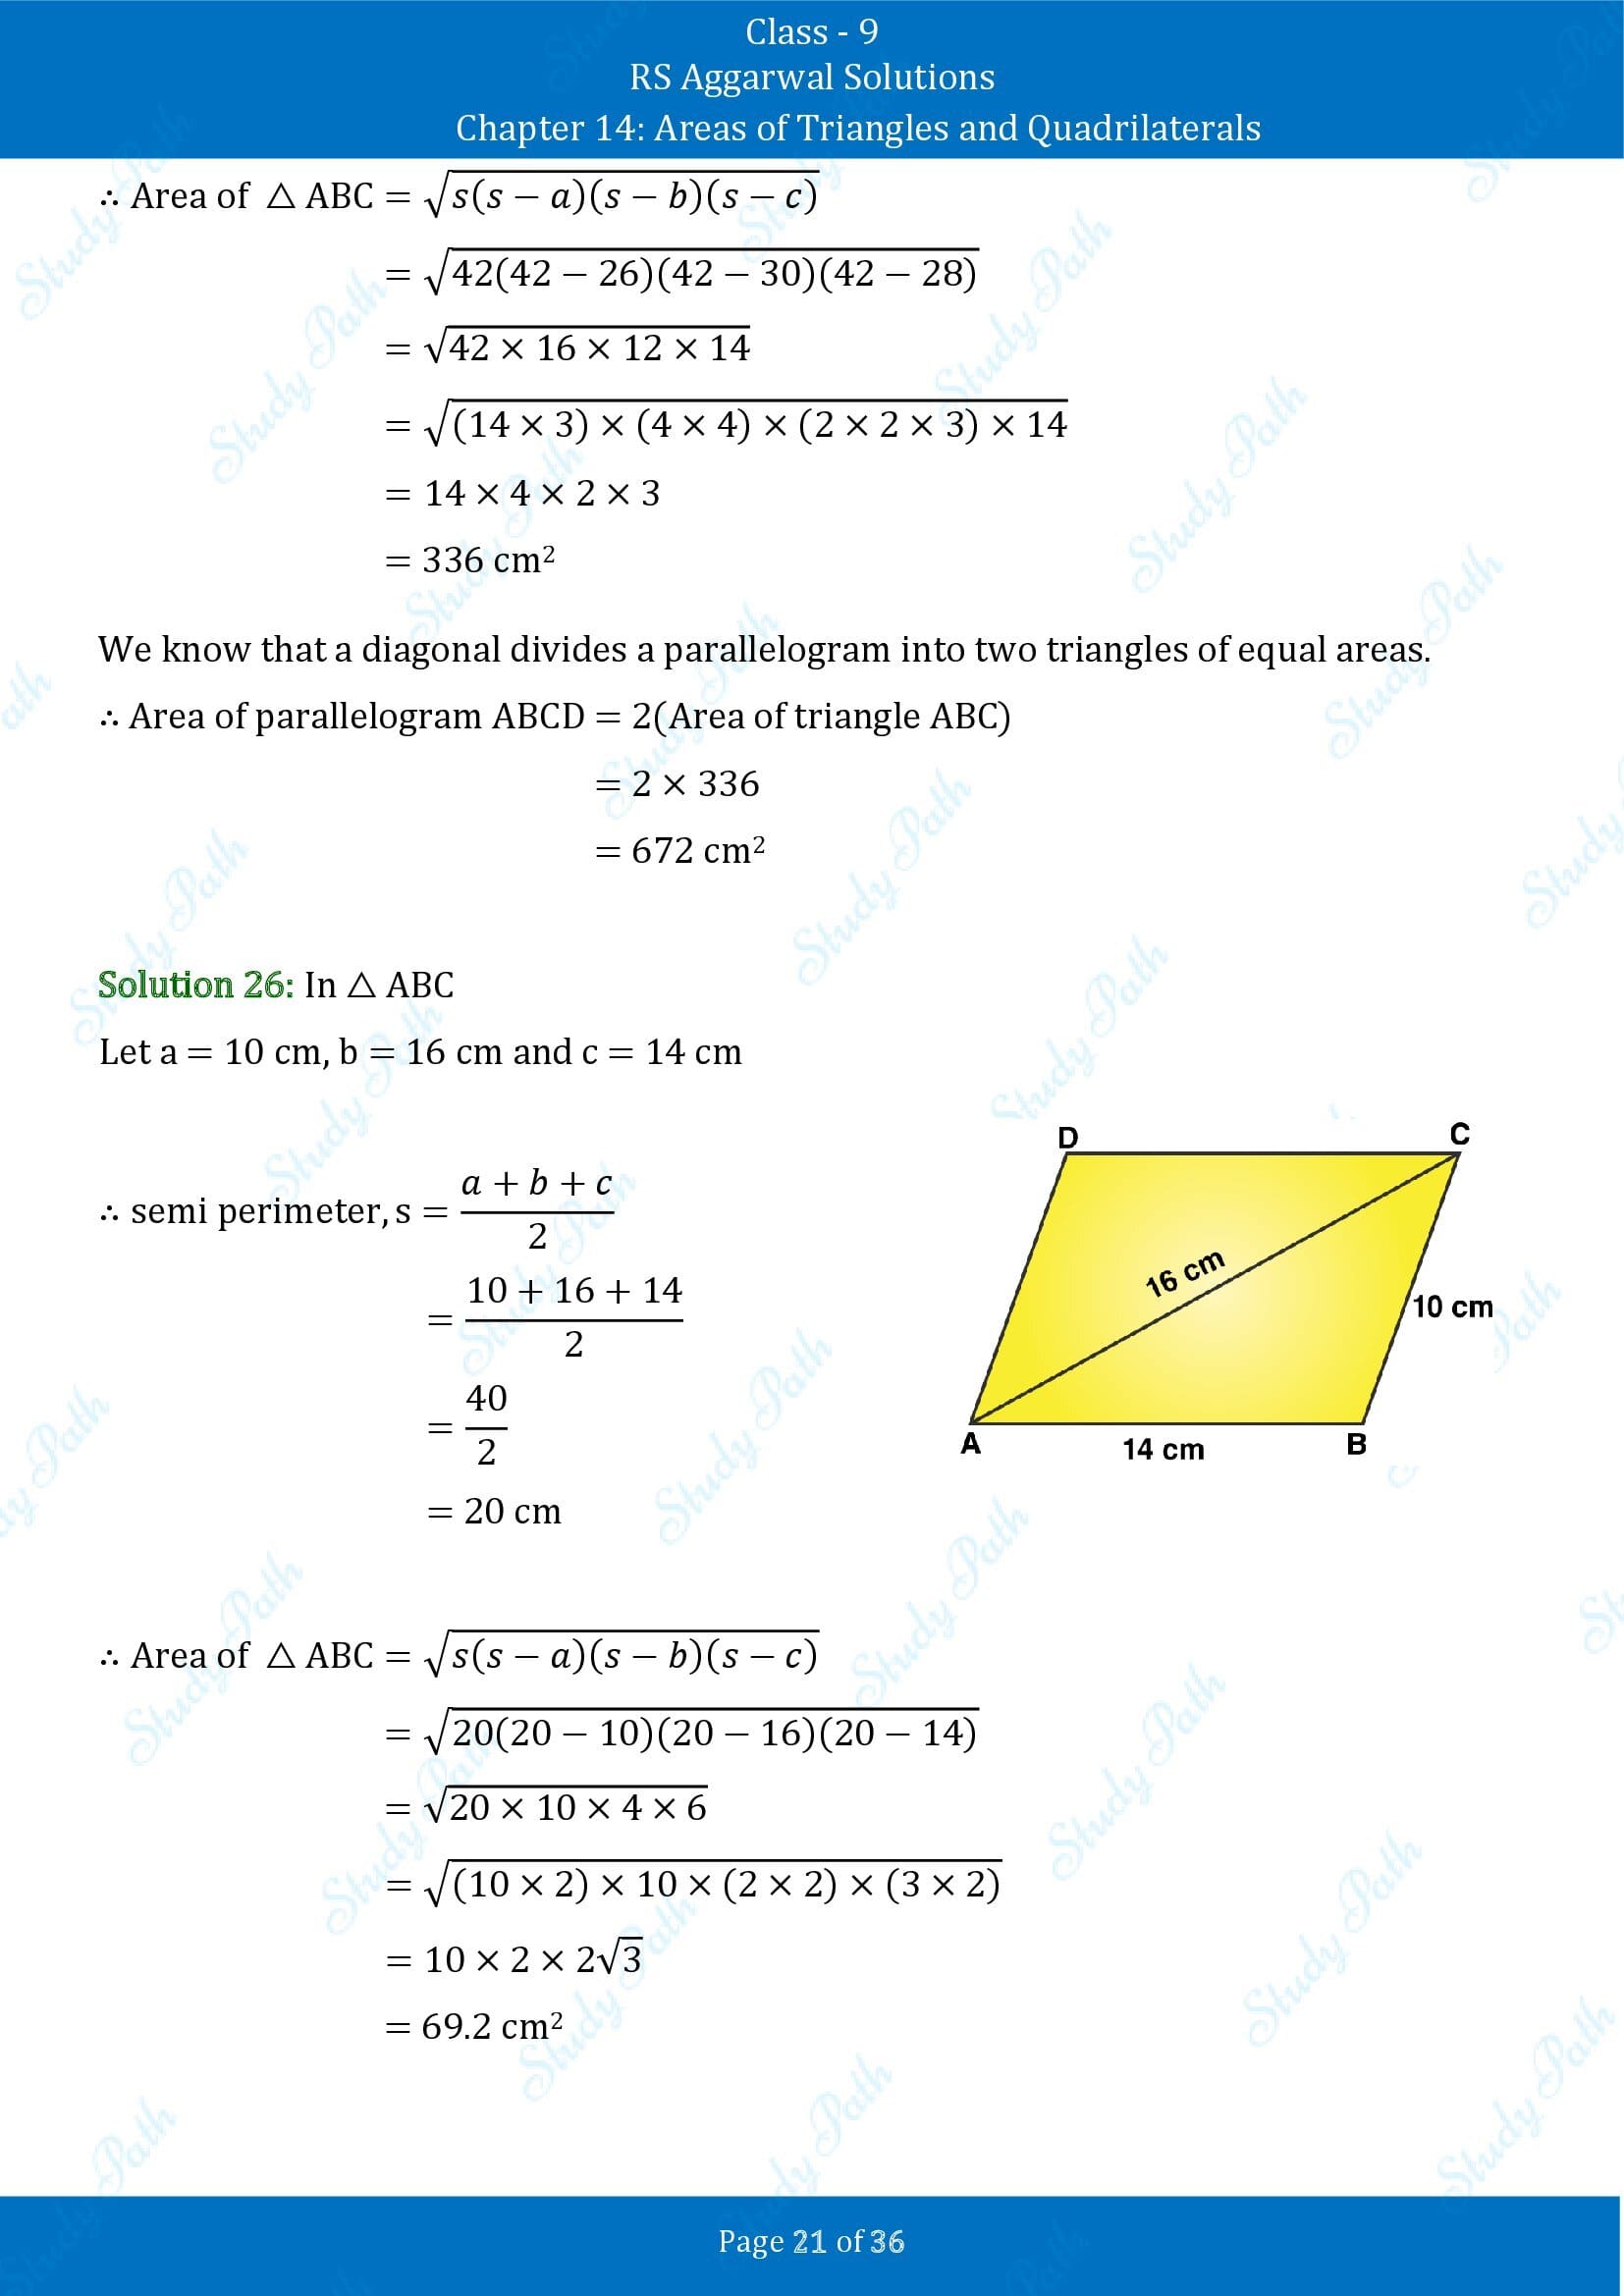 RS Aggarwal Solutions Class 9 Chapter 14 Areas of Triangles and Quadrilaterals Exercise 14 00021